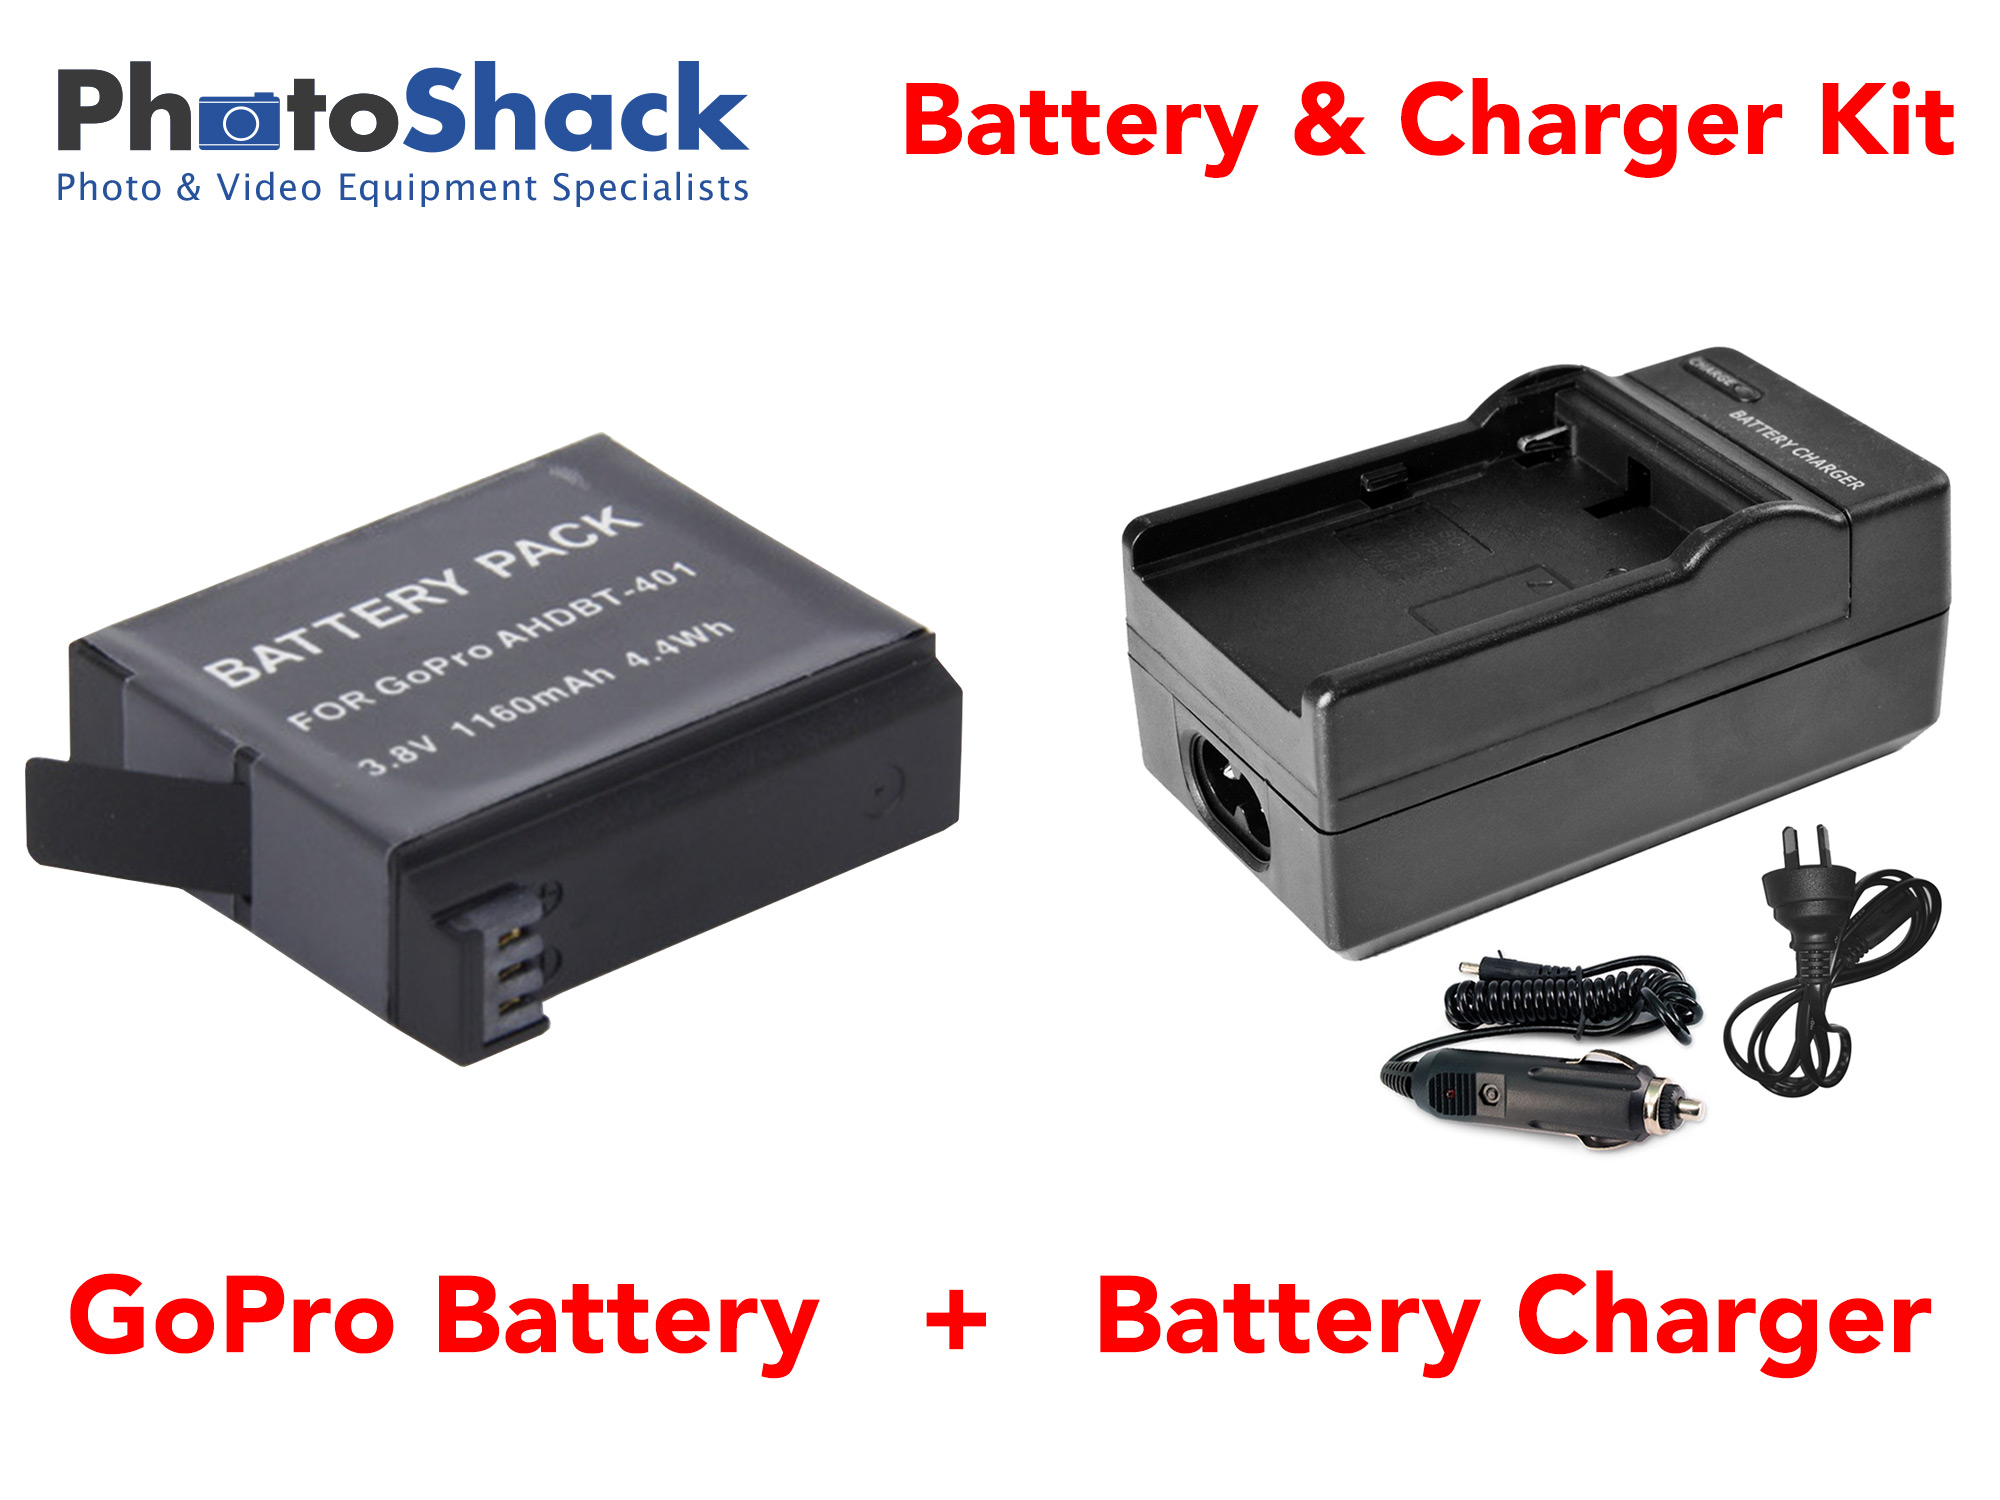 Charger & Battery Kit for GoPro Action Cameras